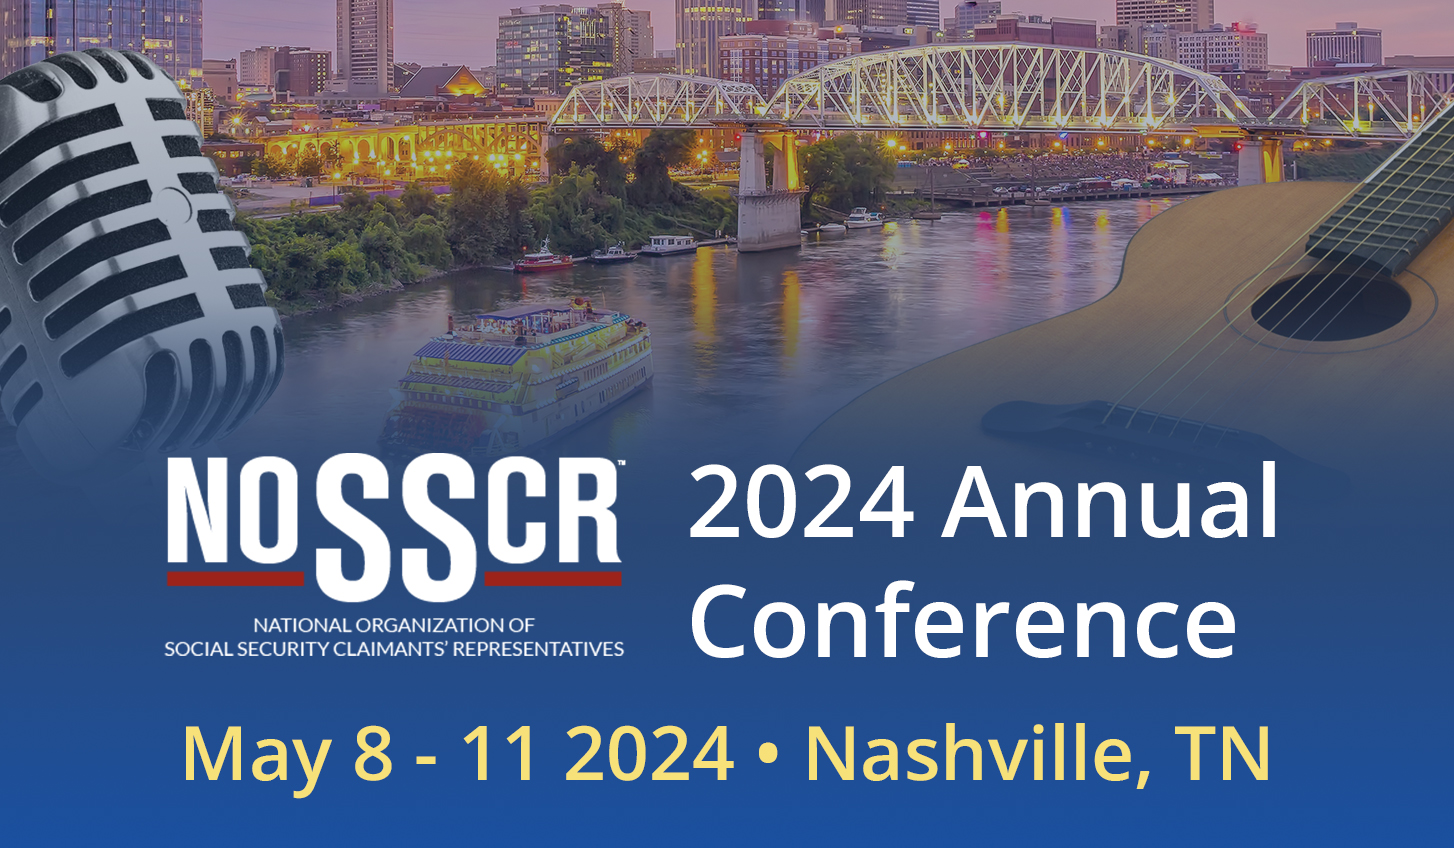 NOSSCR 2024 Annual Conference. May 8 - 11, 2024. Nashville, Tennessee